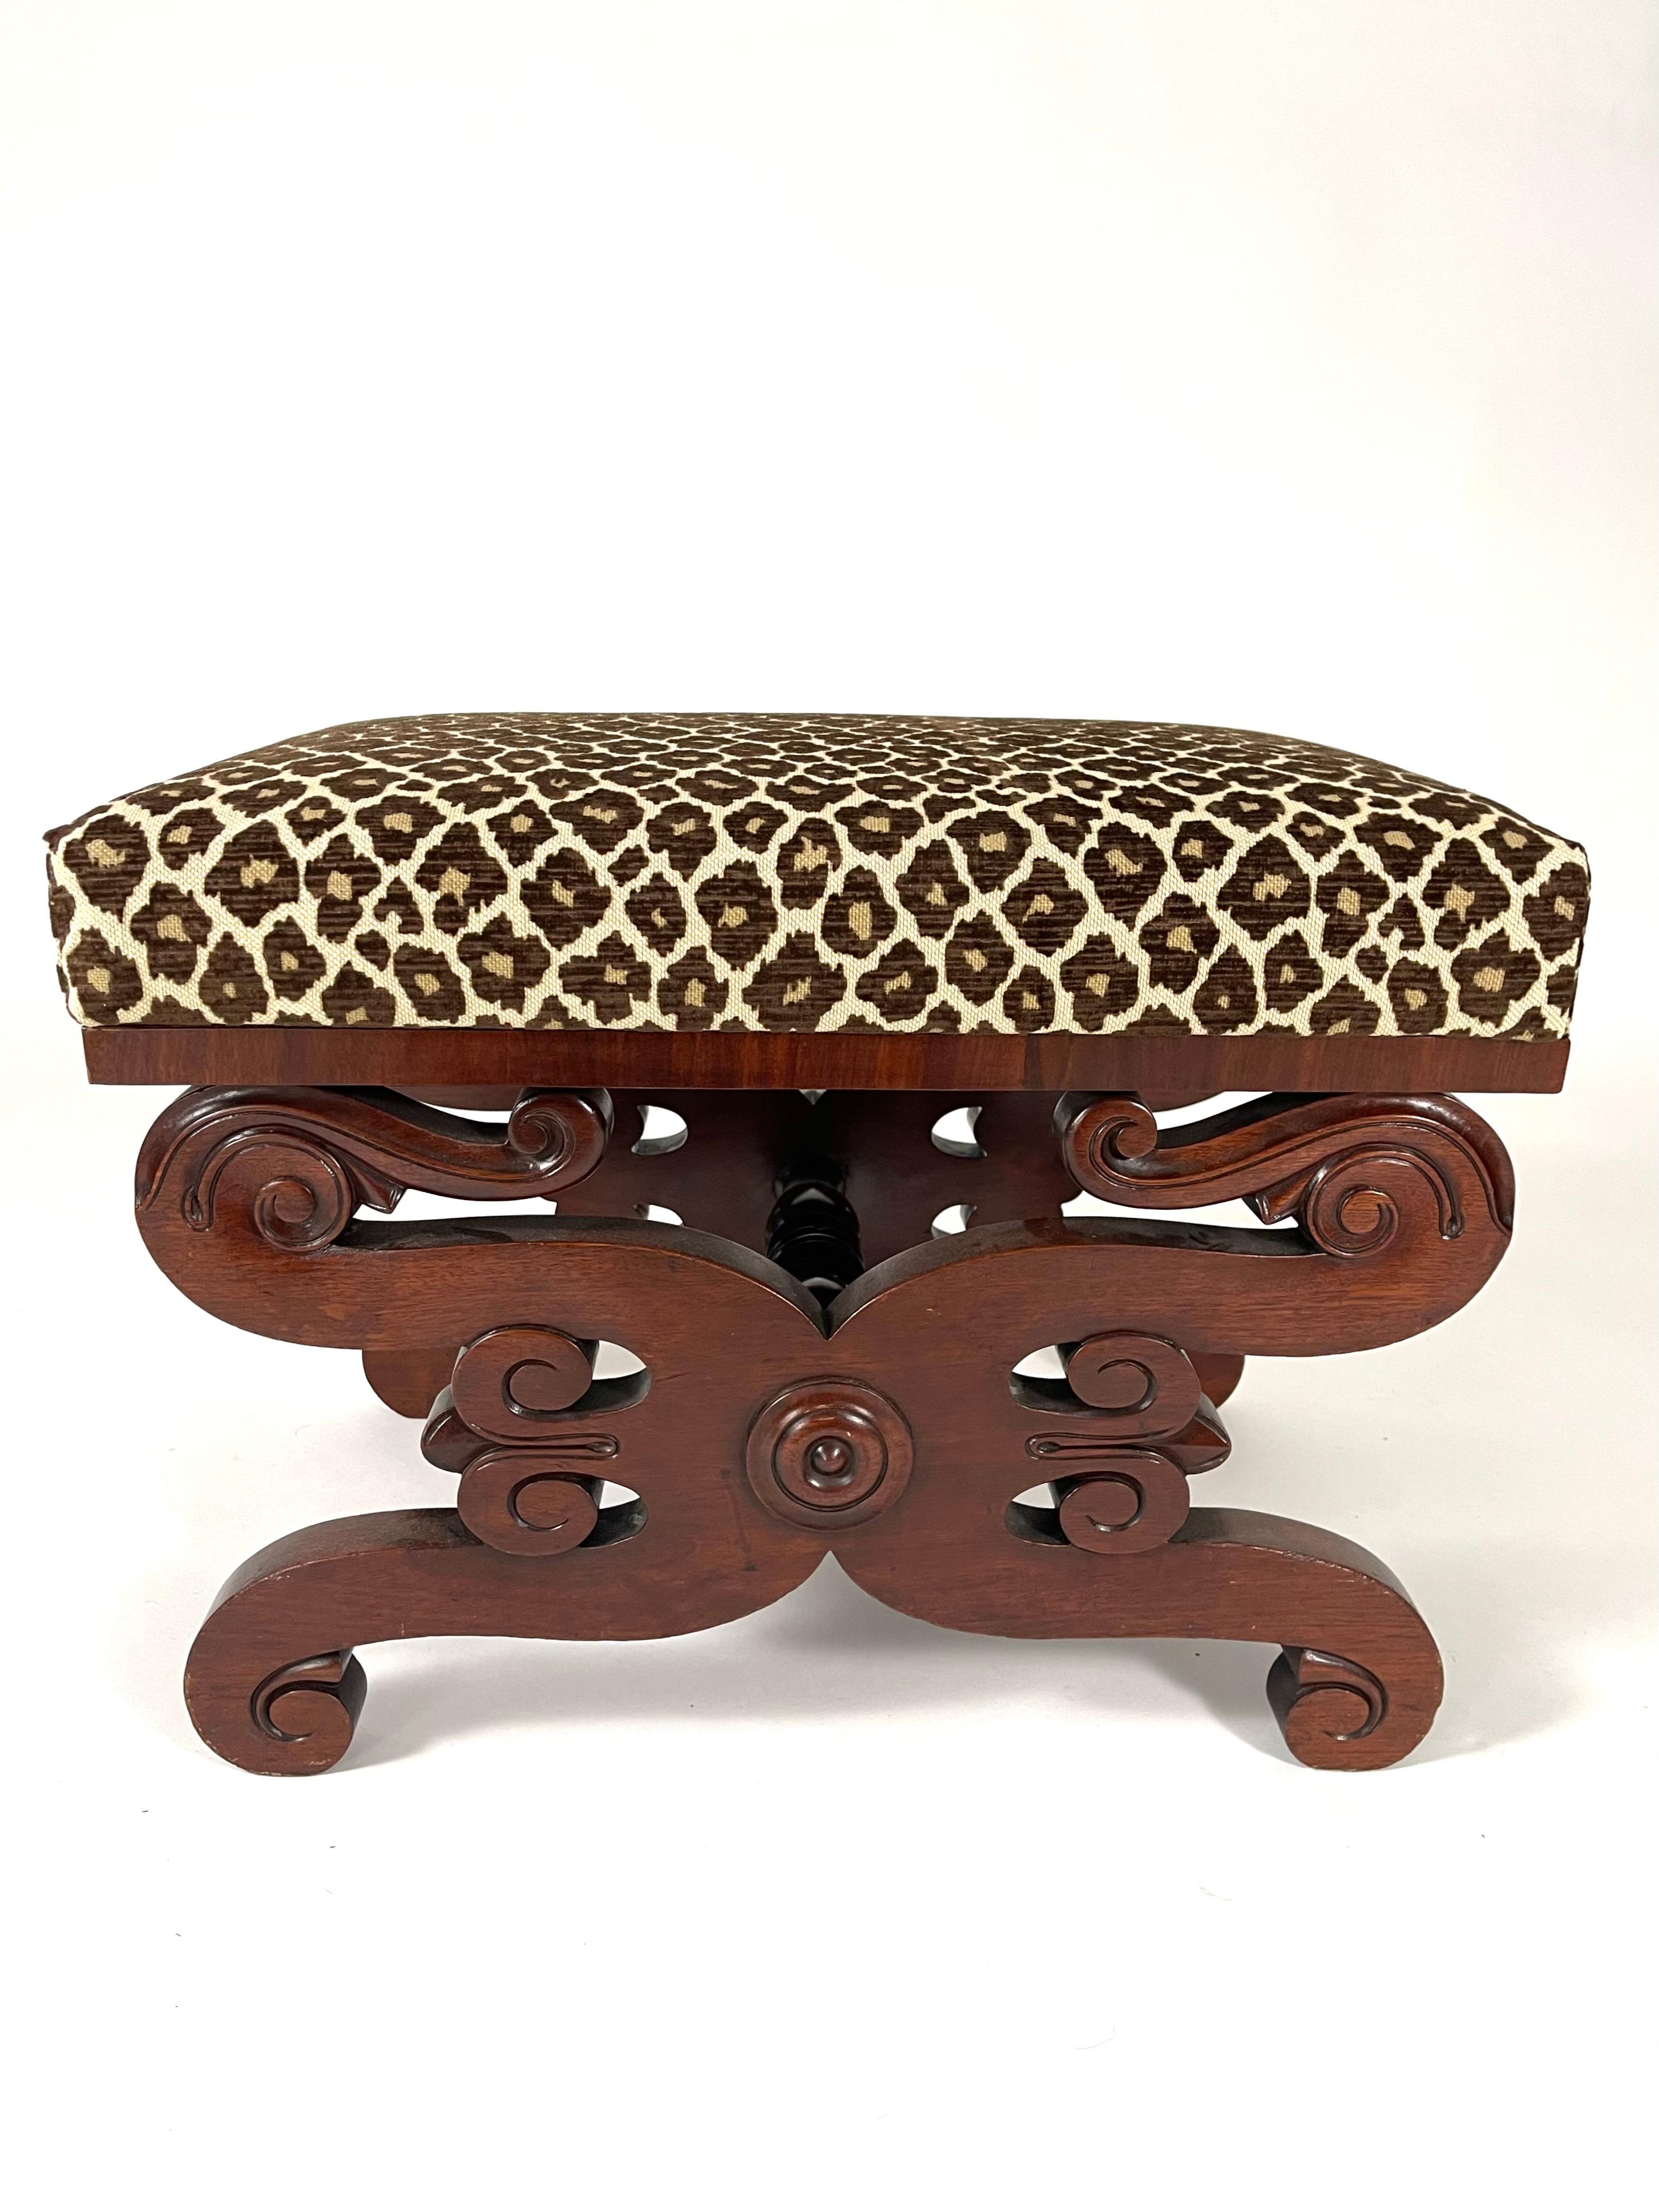 American Classical Carved Mahogany Upholstered Foot Stool Ottoman For Sale